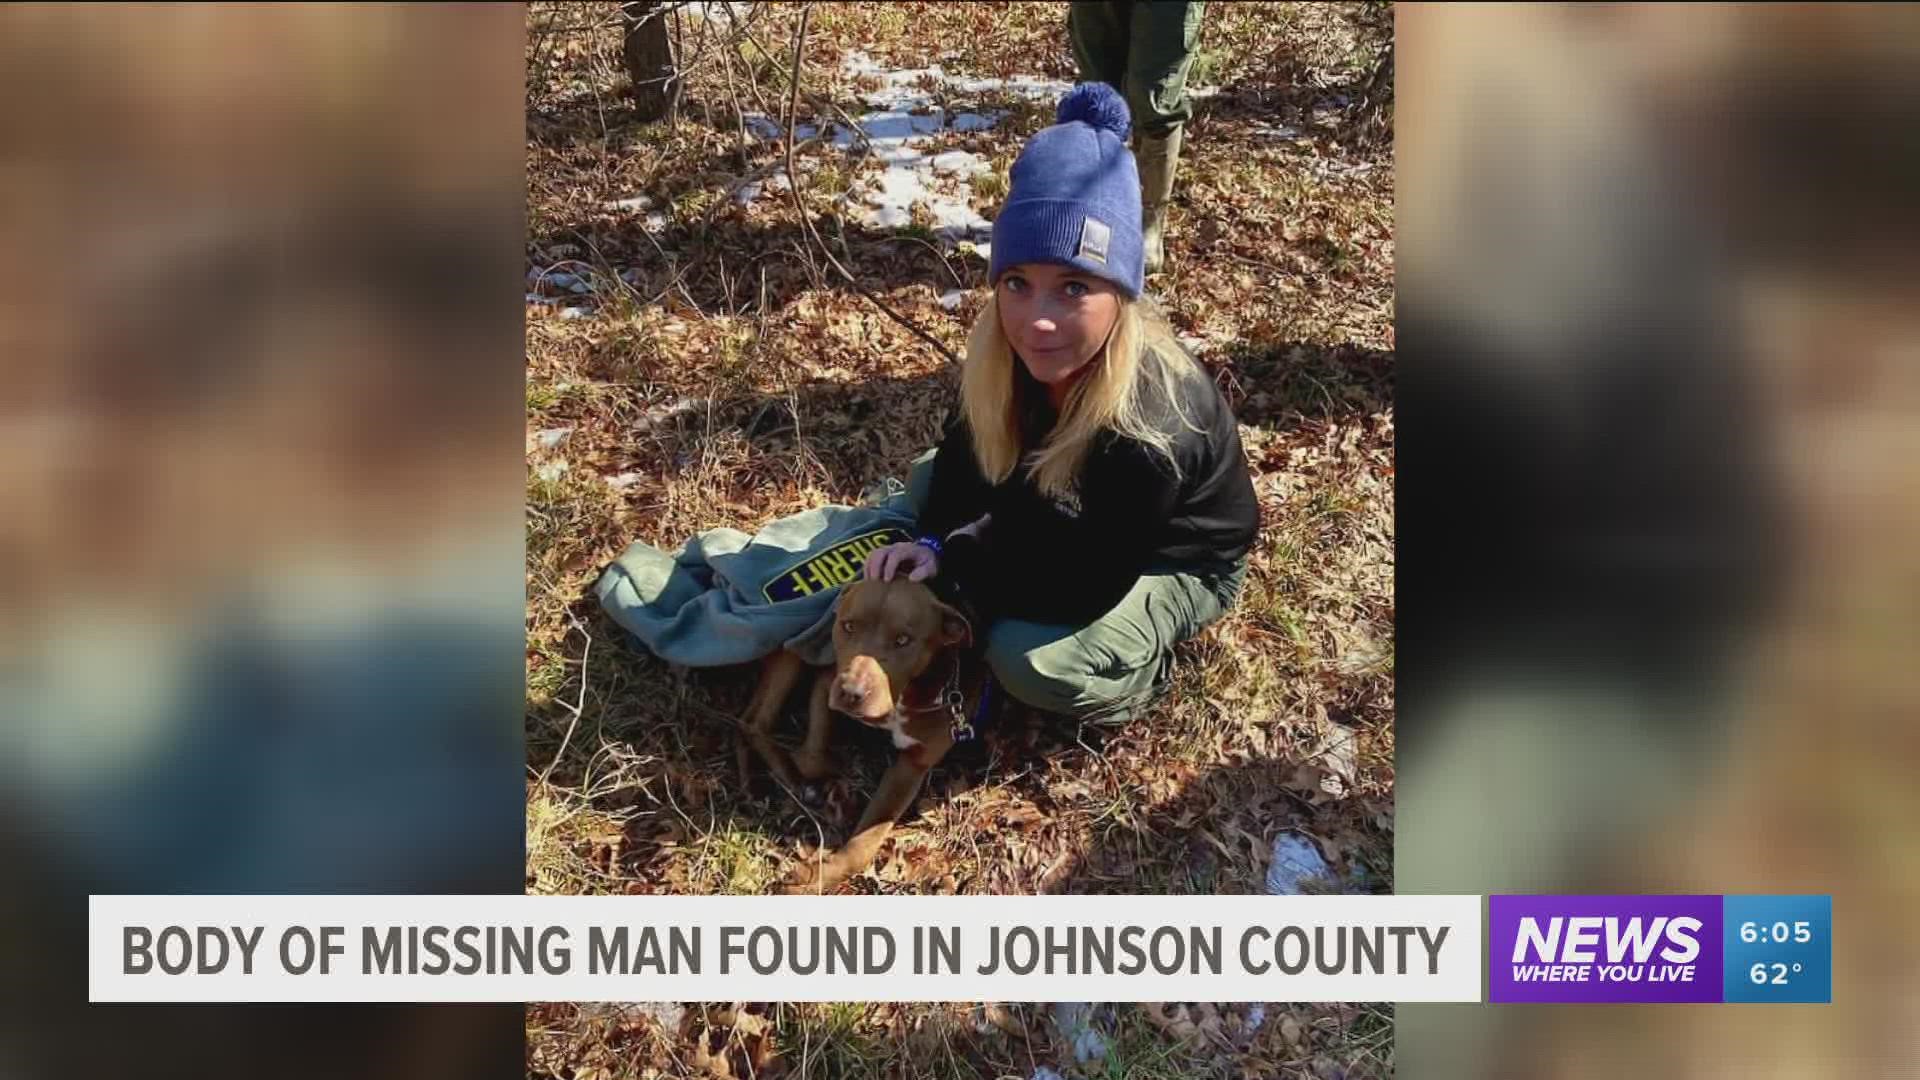 The Johnson County Sheriff's Office located the body of Timothy Reels around 9:30 a.m. Monday morning. His dog, who is still alive, was found right beside him.